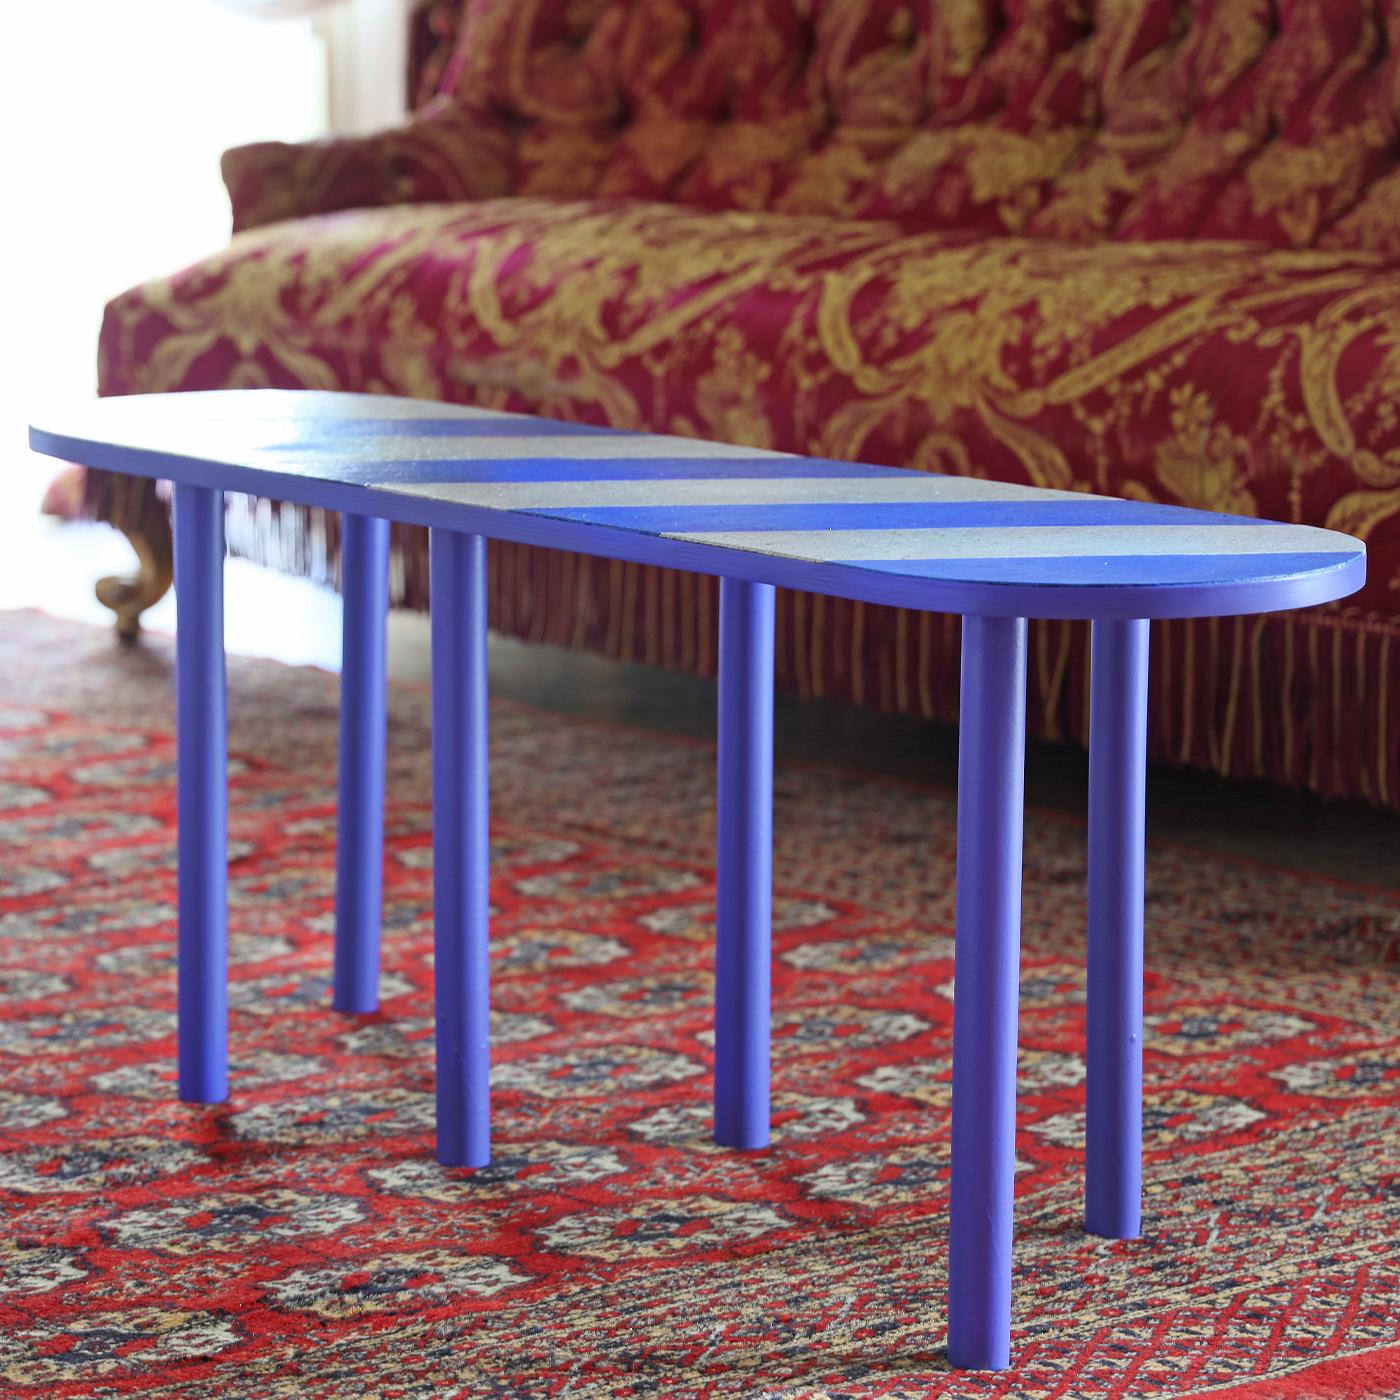 This sustainable side table strikes with its vibrant ultramarine shade painted with water-based glaze. The poplar blockboard frame comprises six cylindrical legs sustaining an elongated top with rounded extremities, whose surface displays a pattern